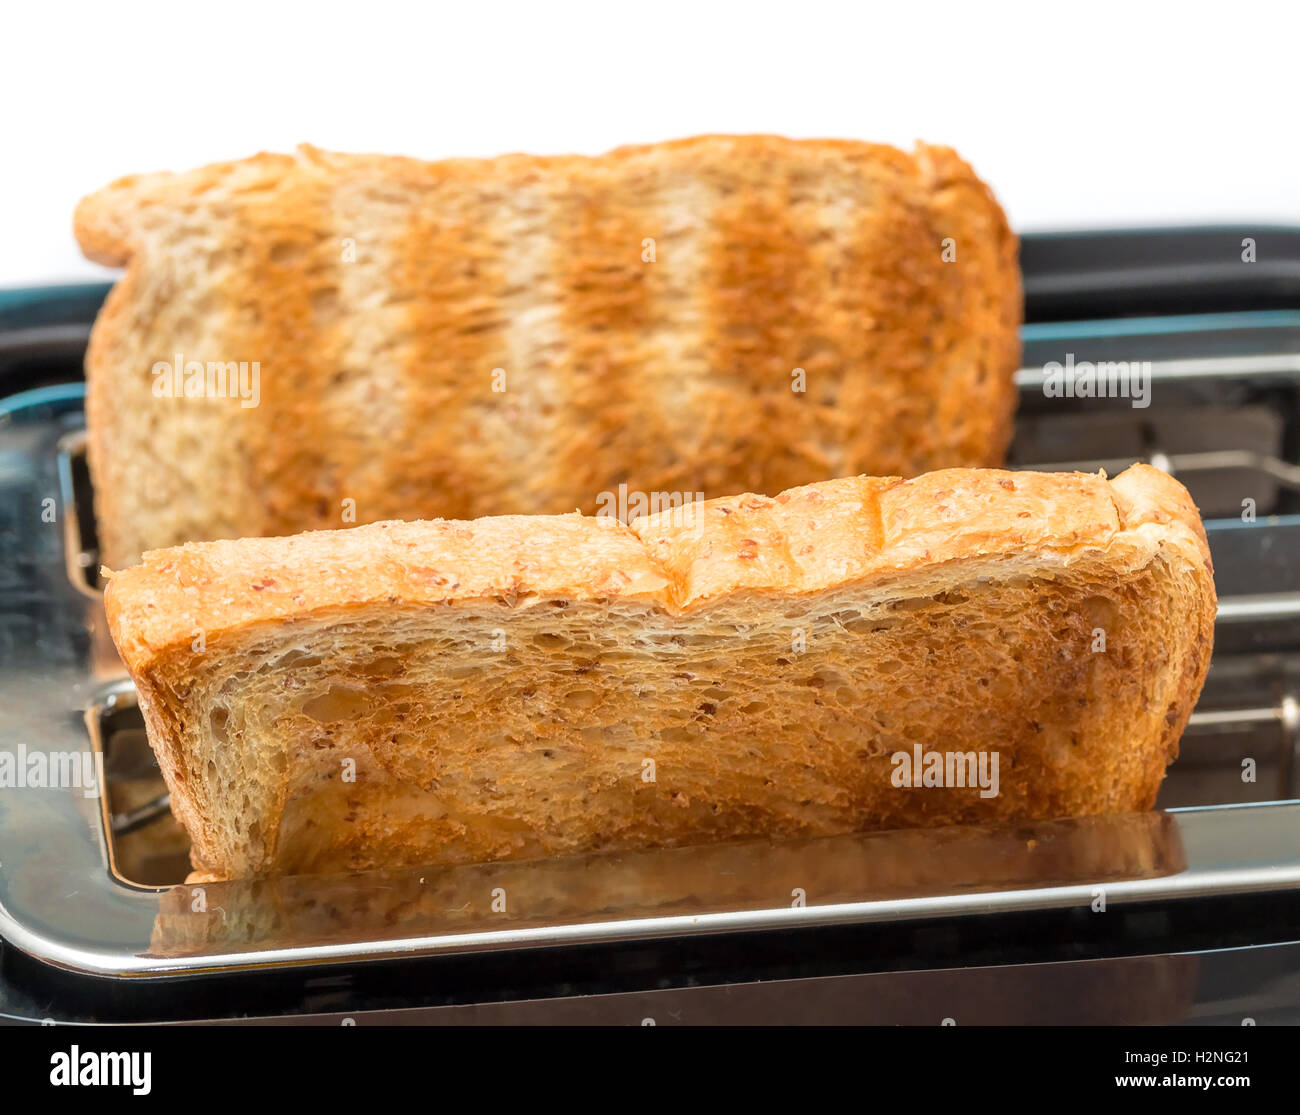 Toasted Bread Meaning Breakfast Toasts And Breaks Stock Photo - Alamy